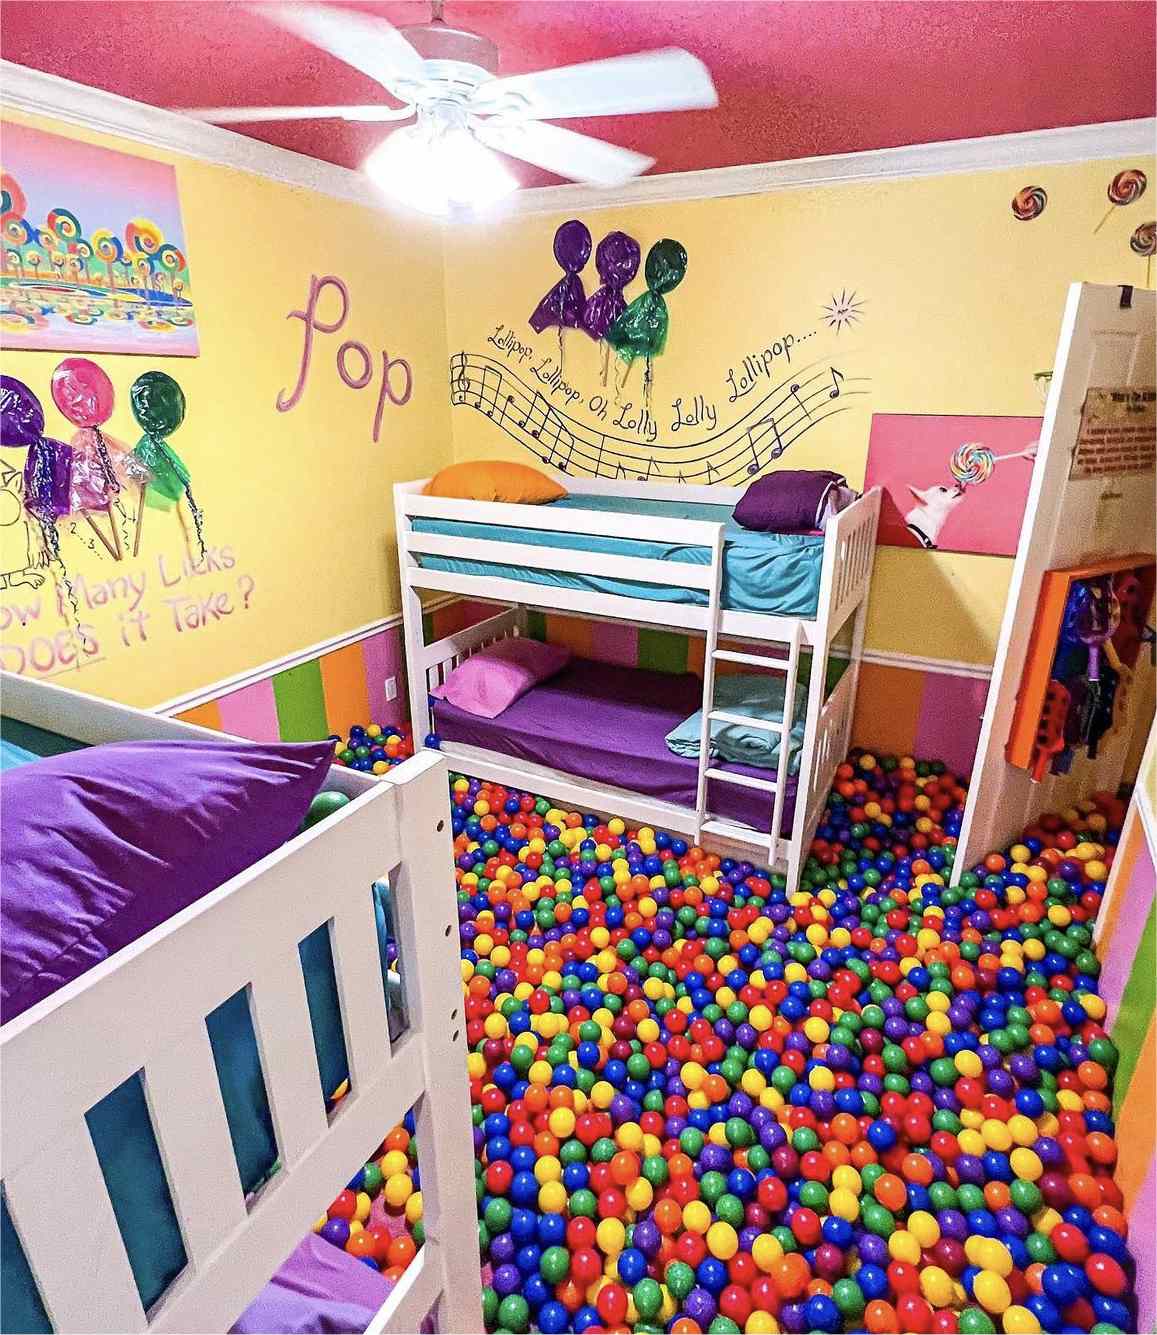 Sweet Escape vacation rental outside of Orlando, Florida featuring a lollipop themed room with its own ball pit!